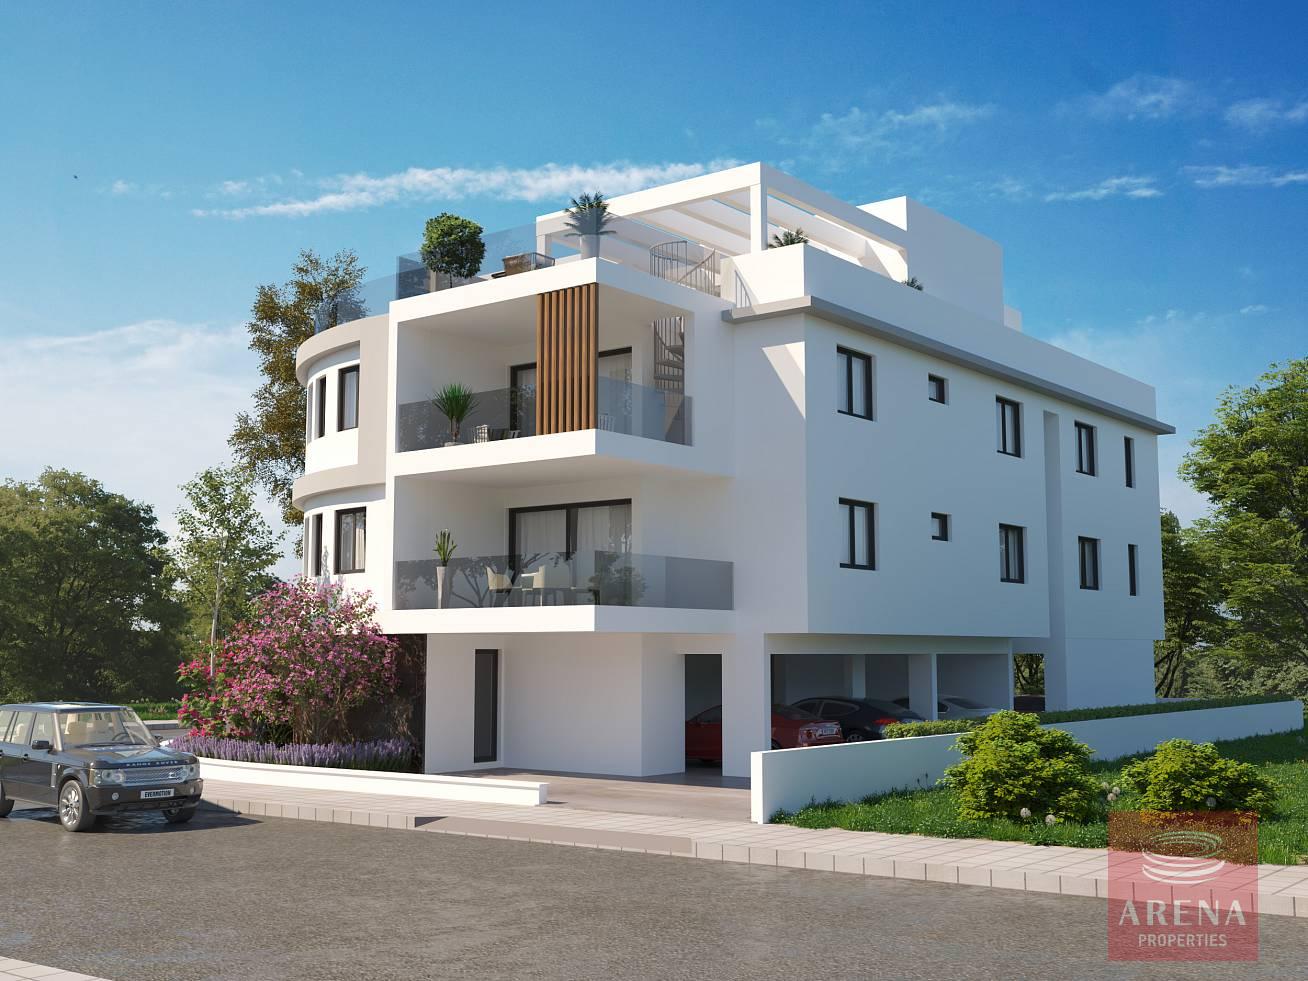 Apartments with roof garden for sale